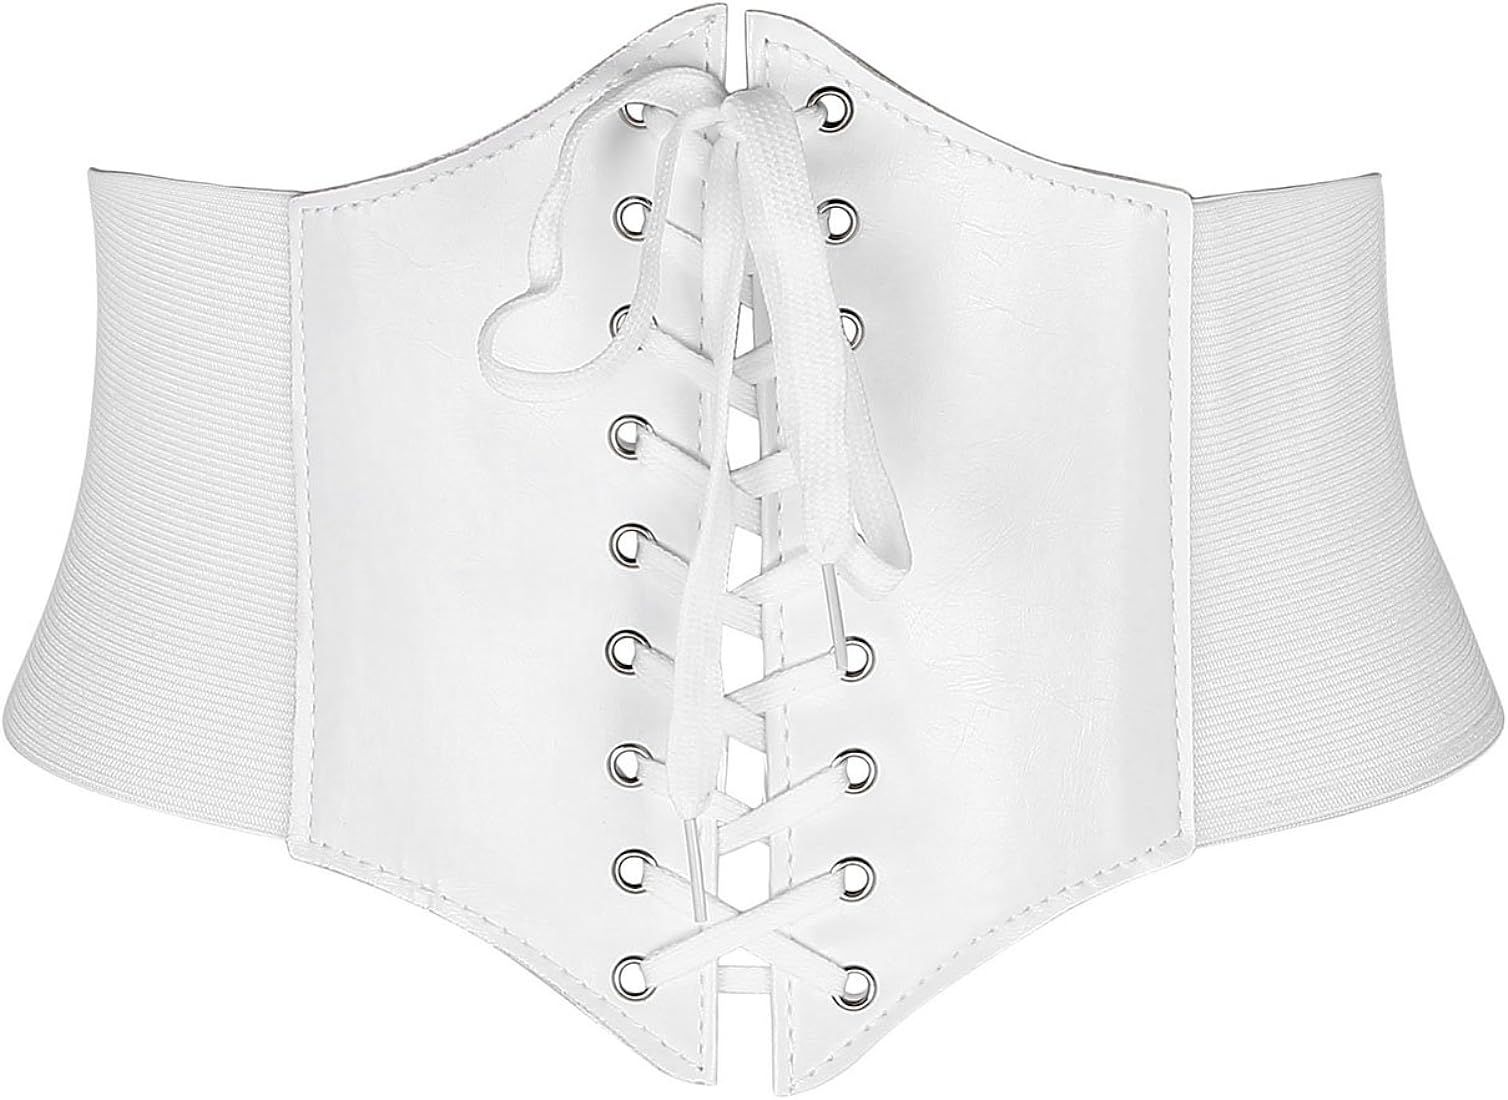 CHIC DIARY Women’s Elastic Costume Waist Belt Lace-up Tied Waspie Corset Belts for Women Hallow... | Amazon (US)